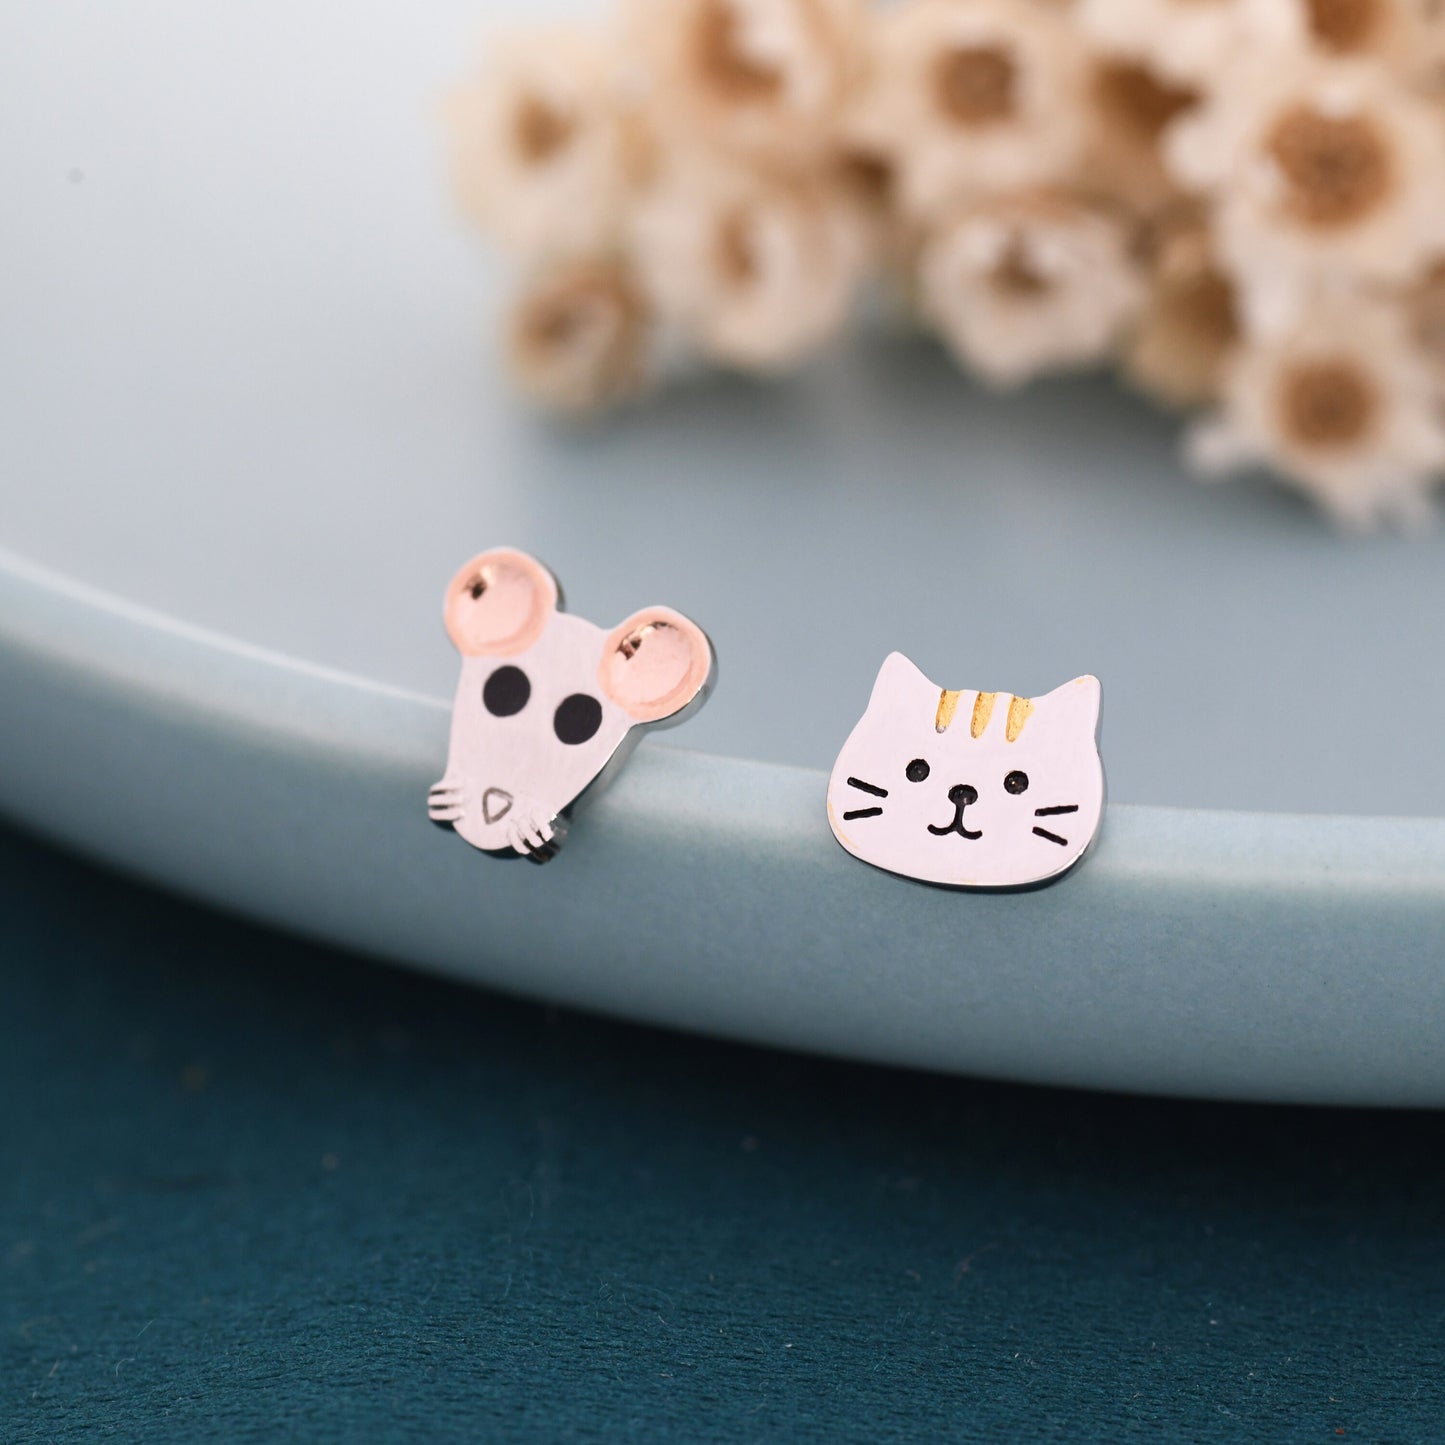 Mismatched Cat and Mouse Stud Earrings in Sterling Silver, Asymmetric Cat and Mouse Earrings, Cute Cat Lover Earrings